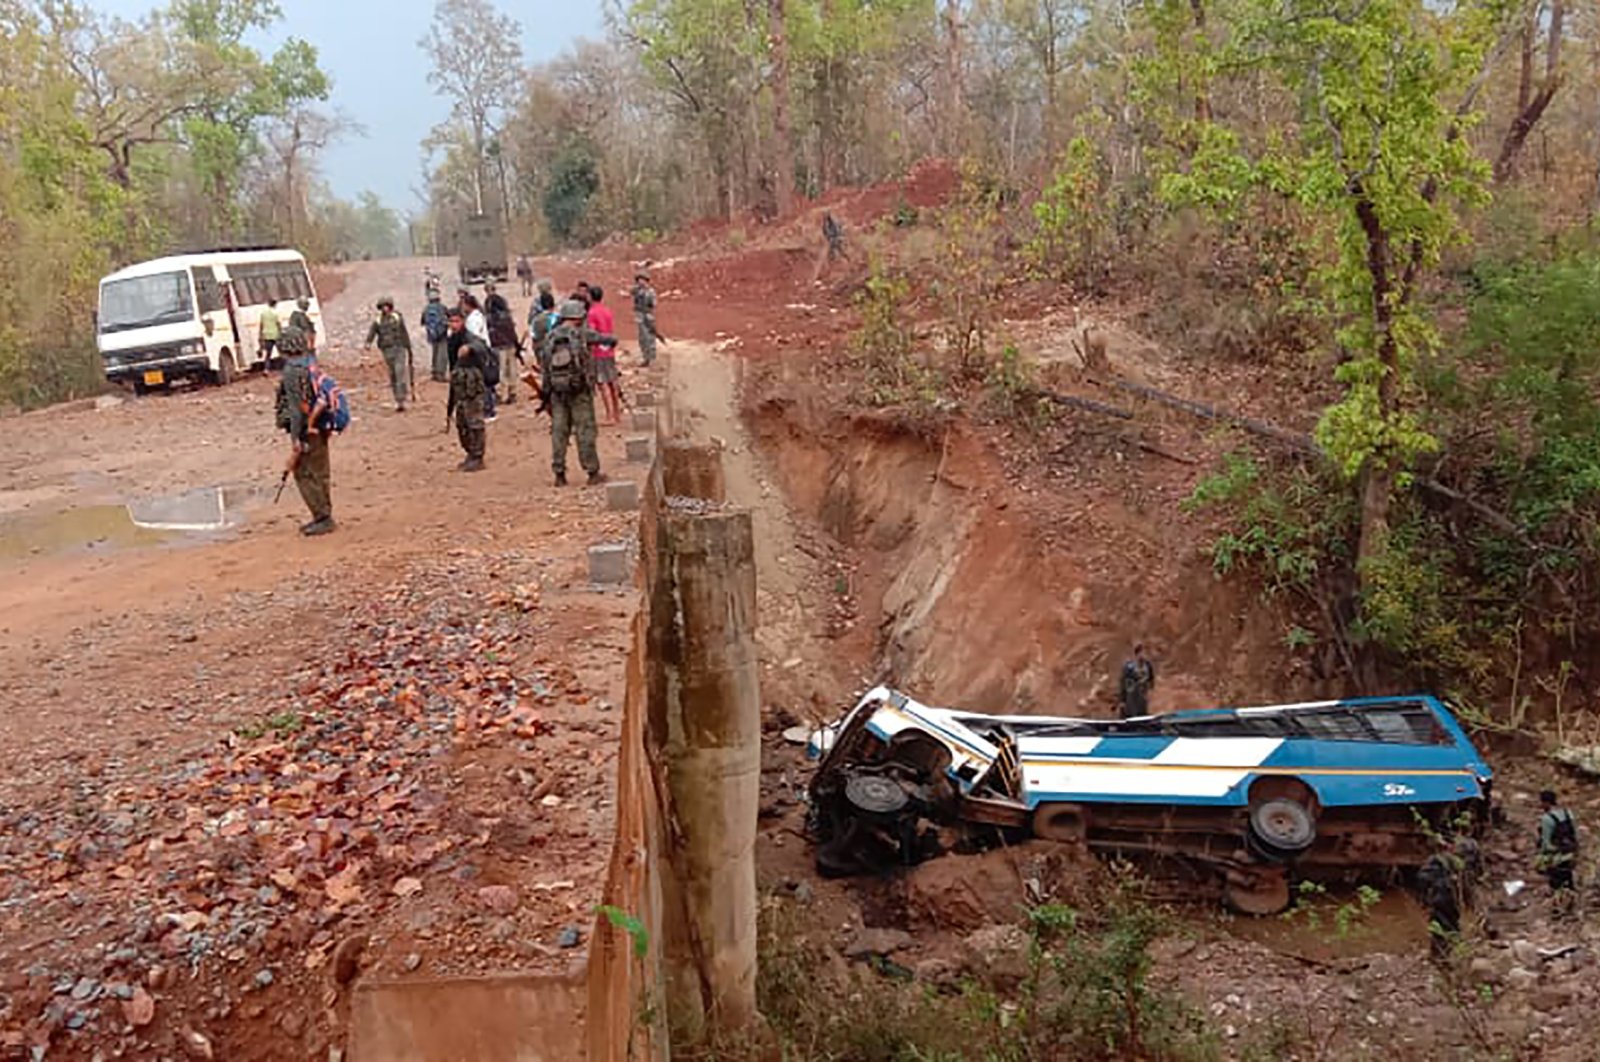 Security officers patrol the site of a bombing in the Narayanpur district of Chhattisgarh state, India, Tuesday, March 23, 2021. (AP Photo)